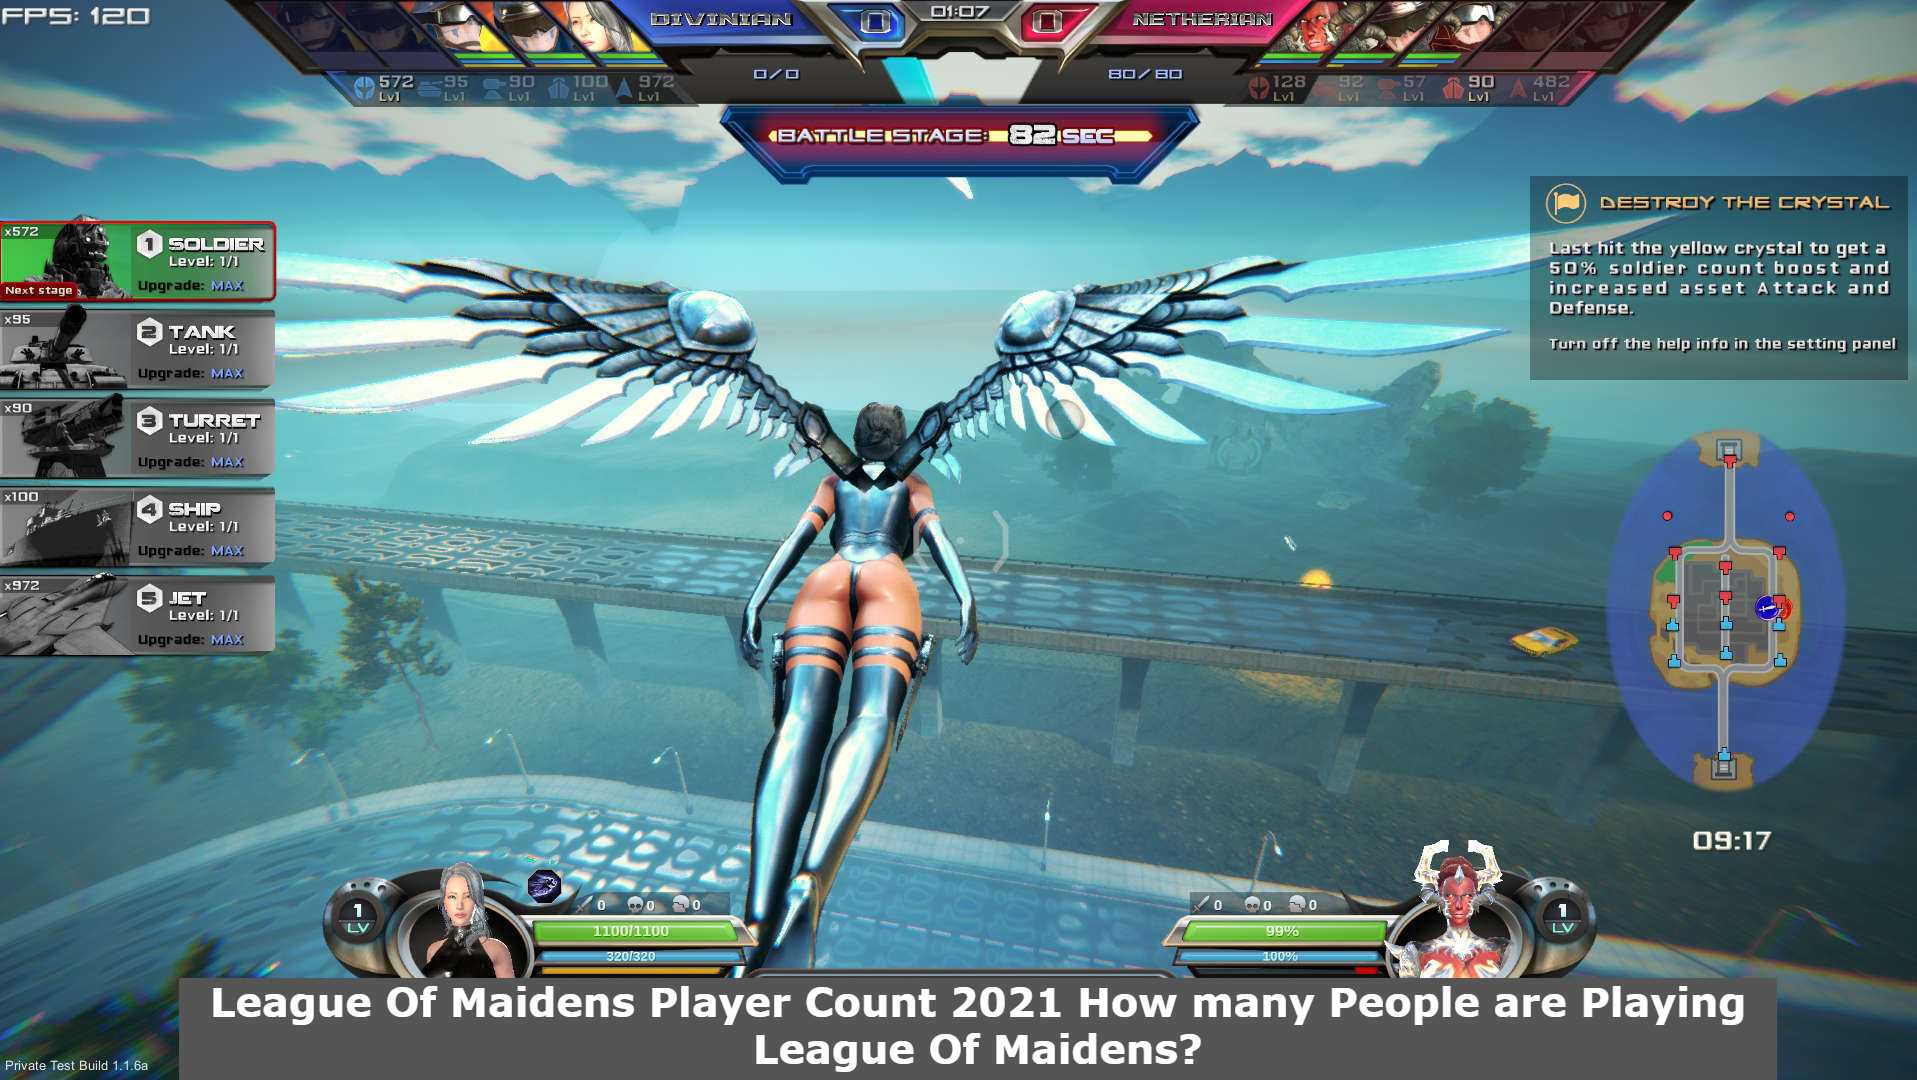 League Of Maidens Player Count 2021 How many People are Playing League Of Maidens?